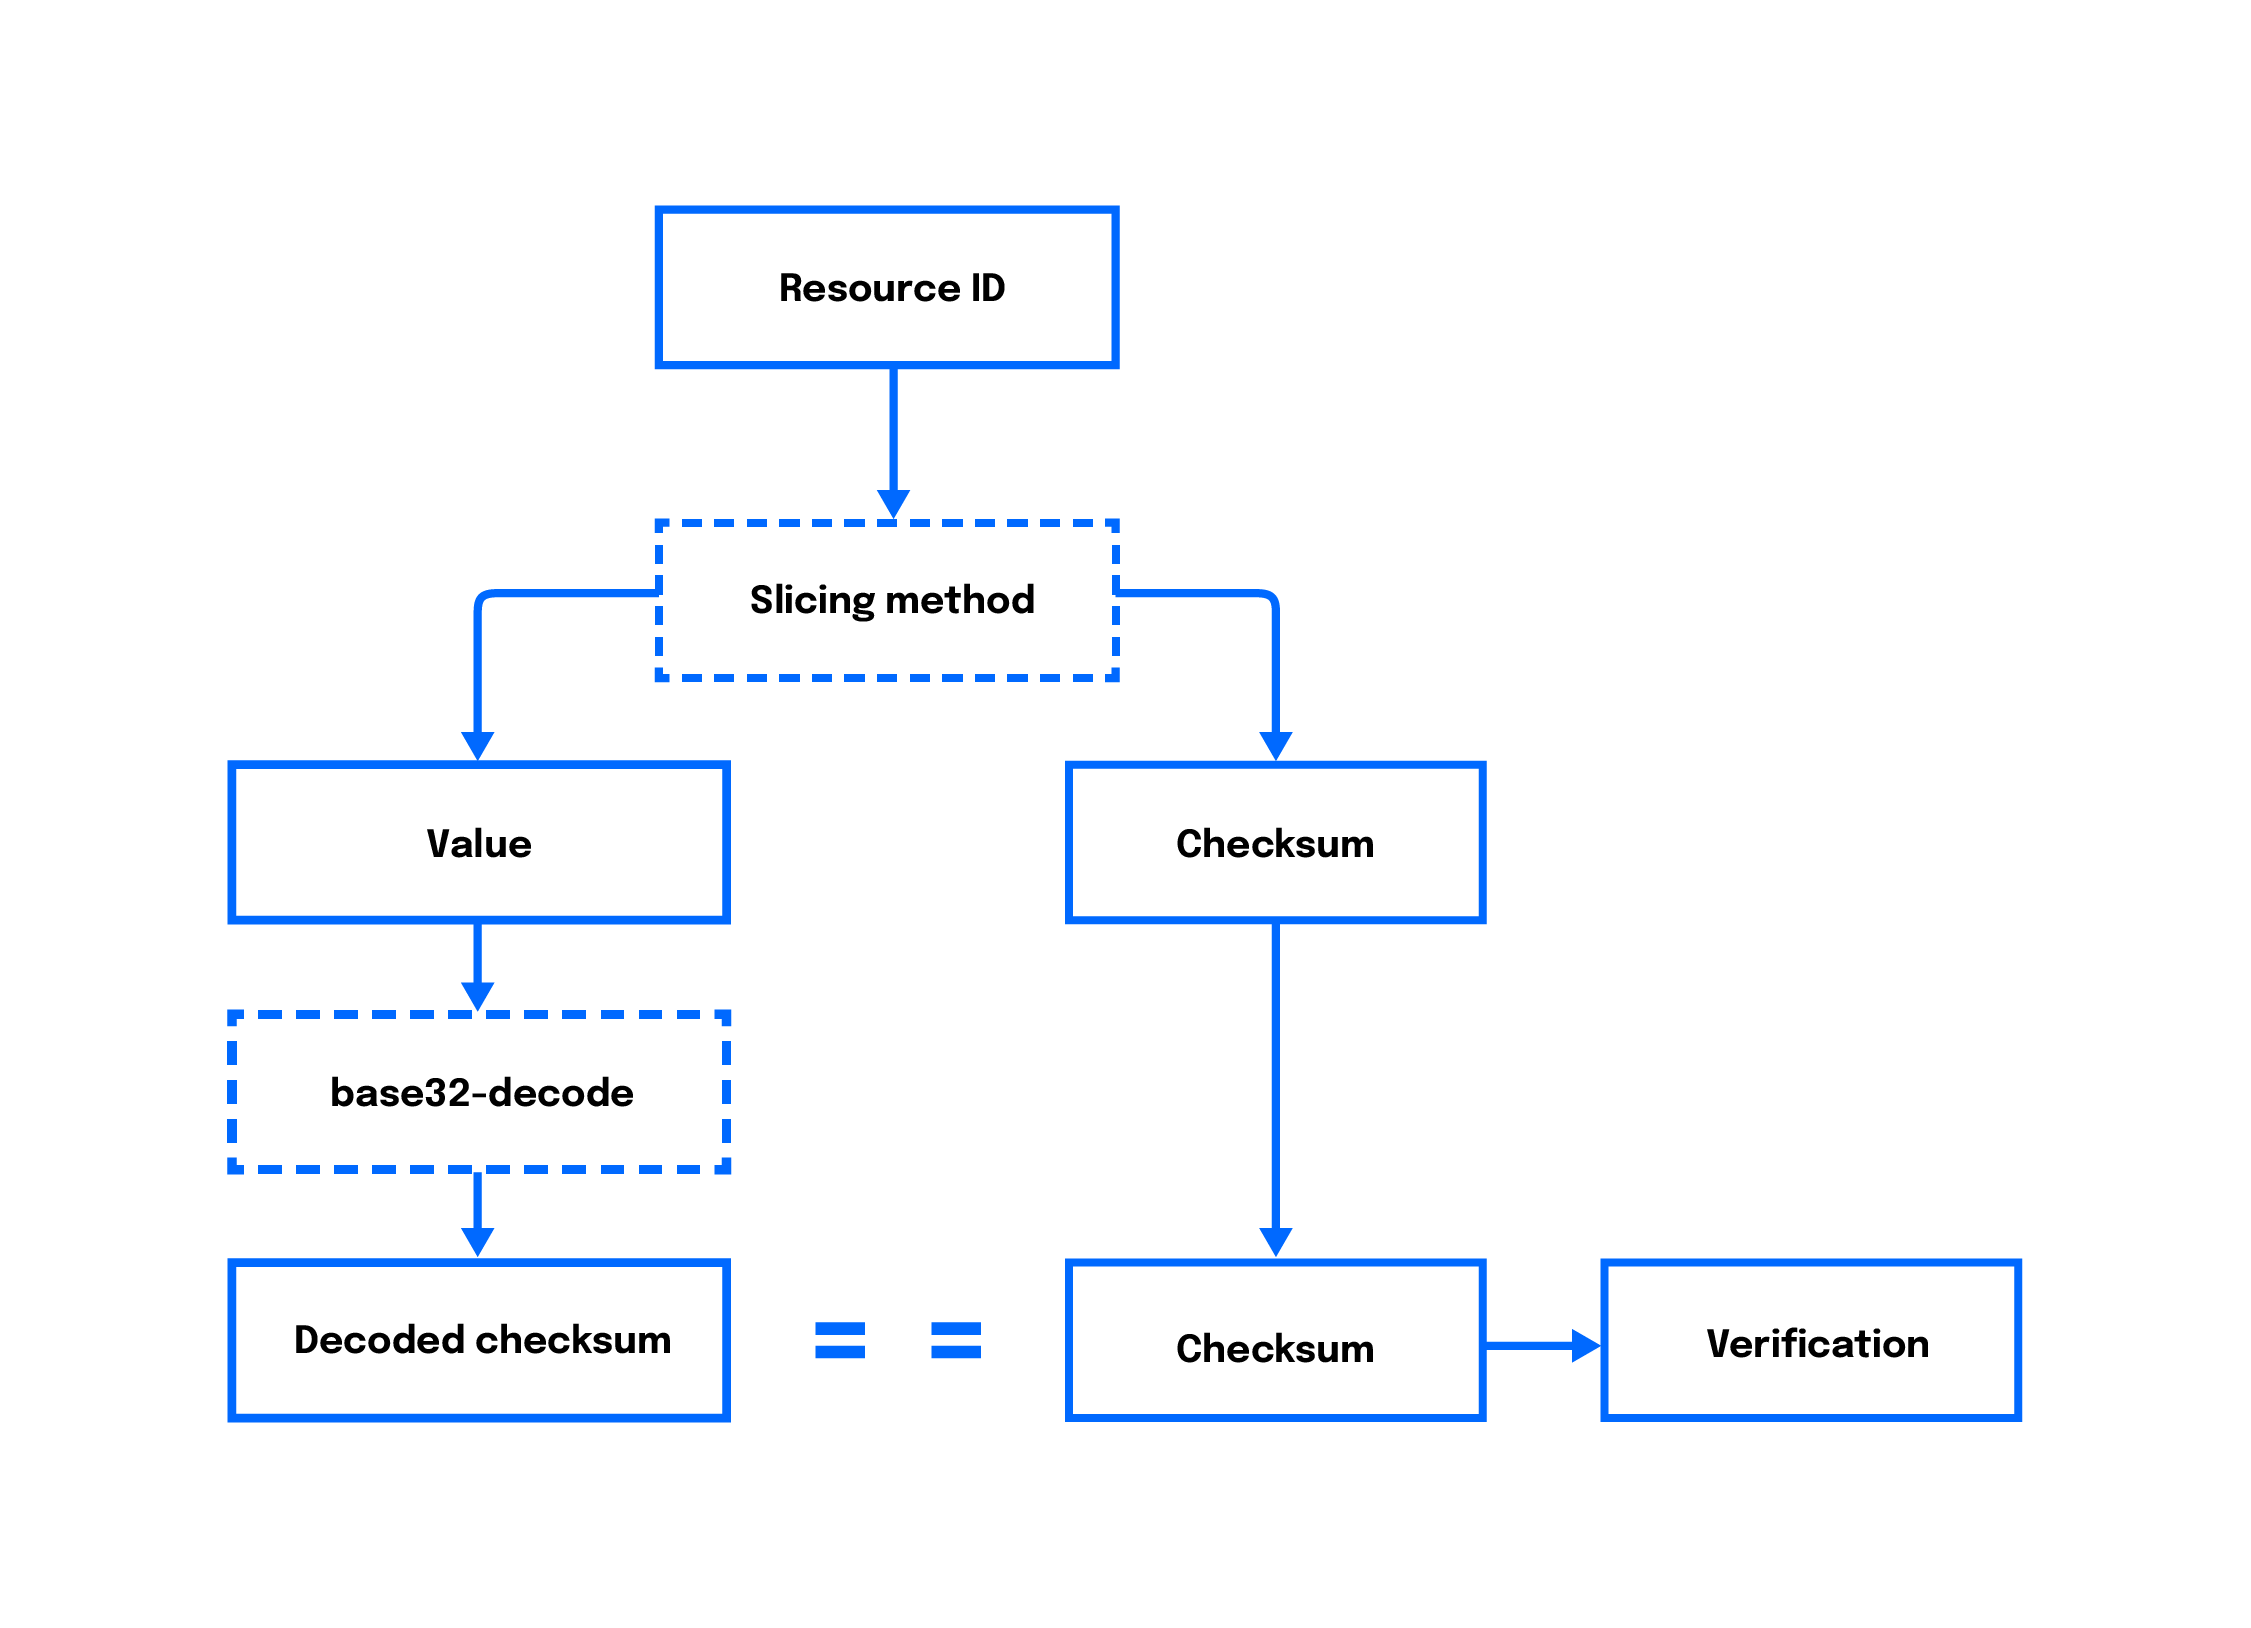 A chart with Resource ID at the top. It points to Slicing Method, which has two branches: Value and Checkum. The Value branch points to the base32-decode, which then becomes a Decoded checksum. The Checksum branch points to a Checksum. If the Decoded checksum and the Checksum match, it results in Verification.